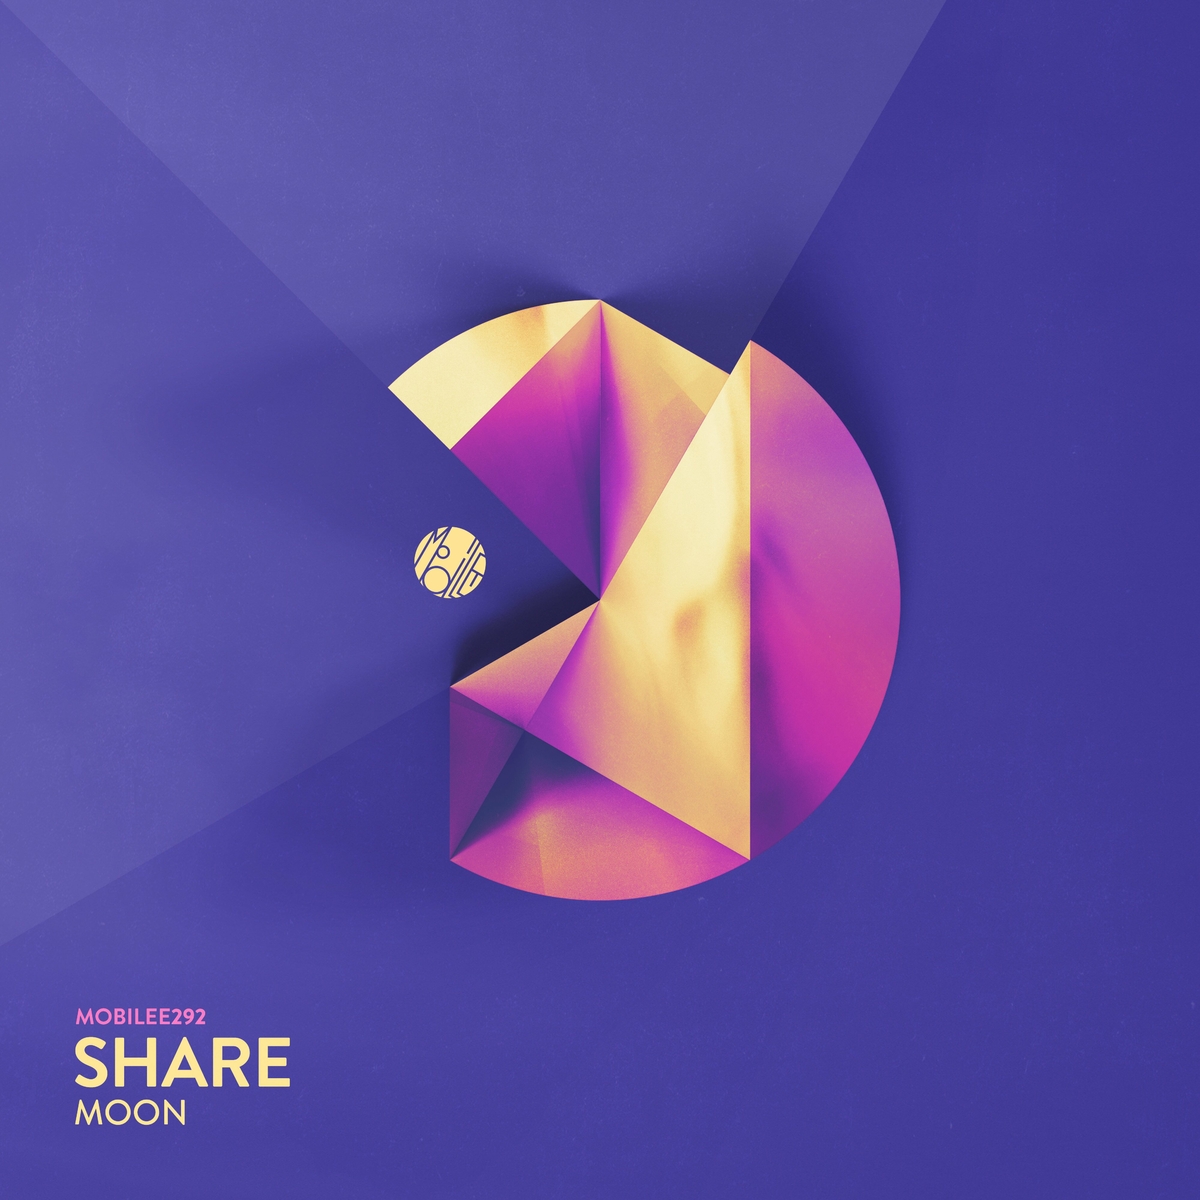 Share - Moon on Mobilee Records